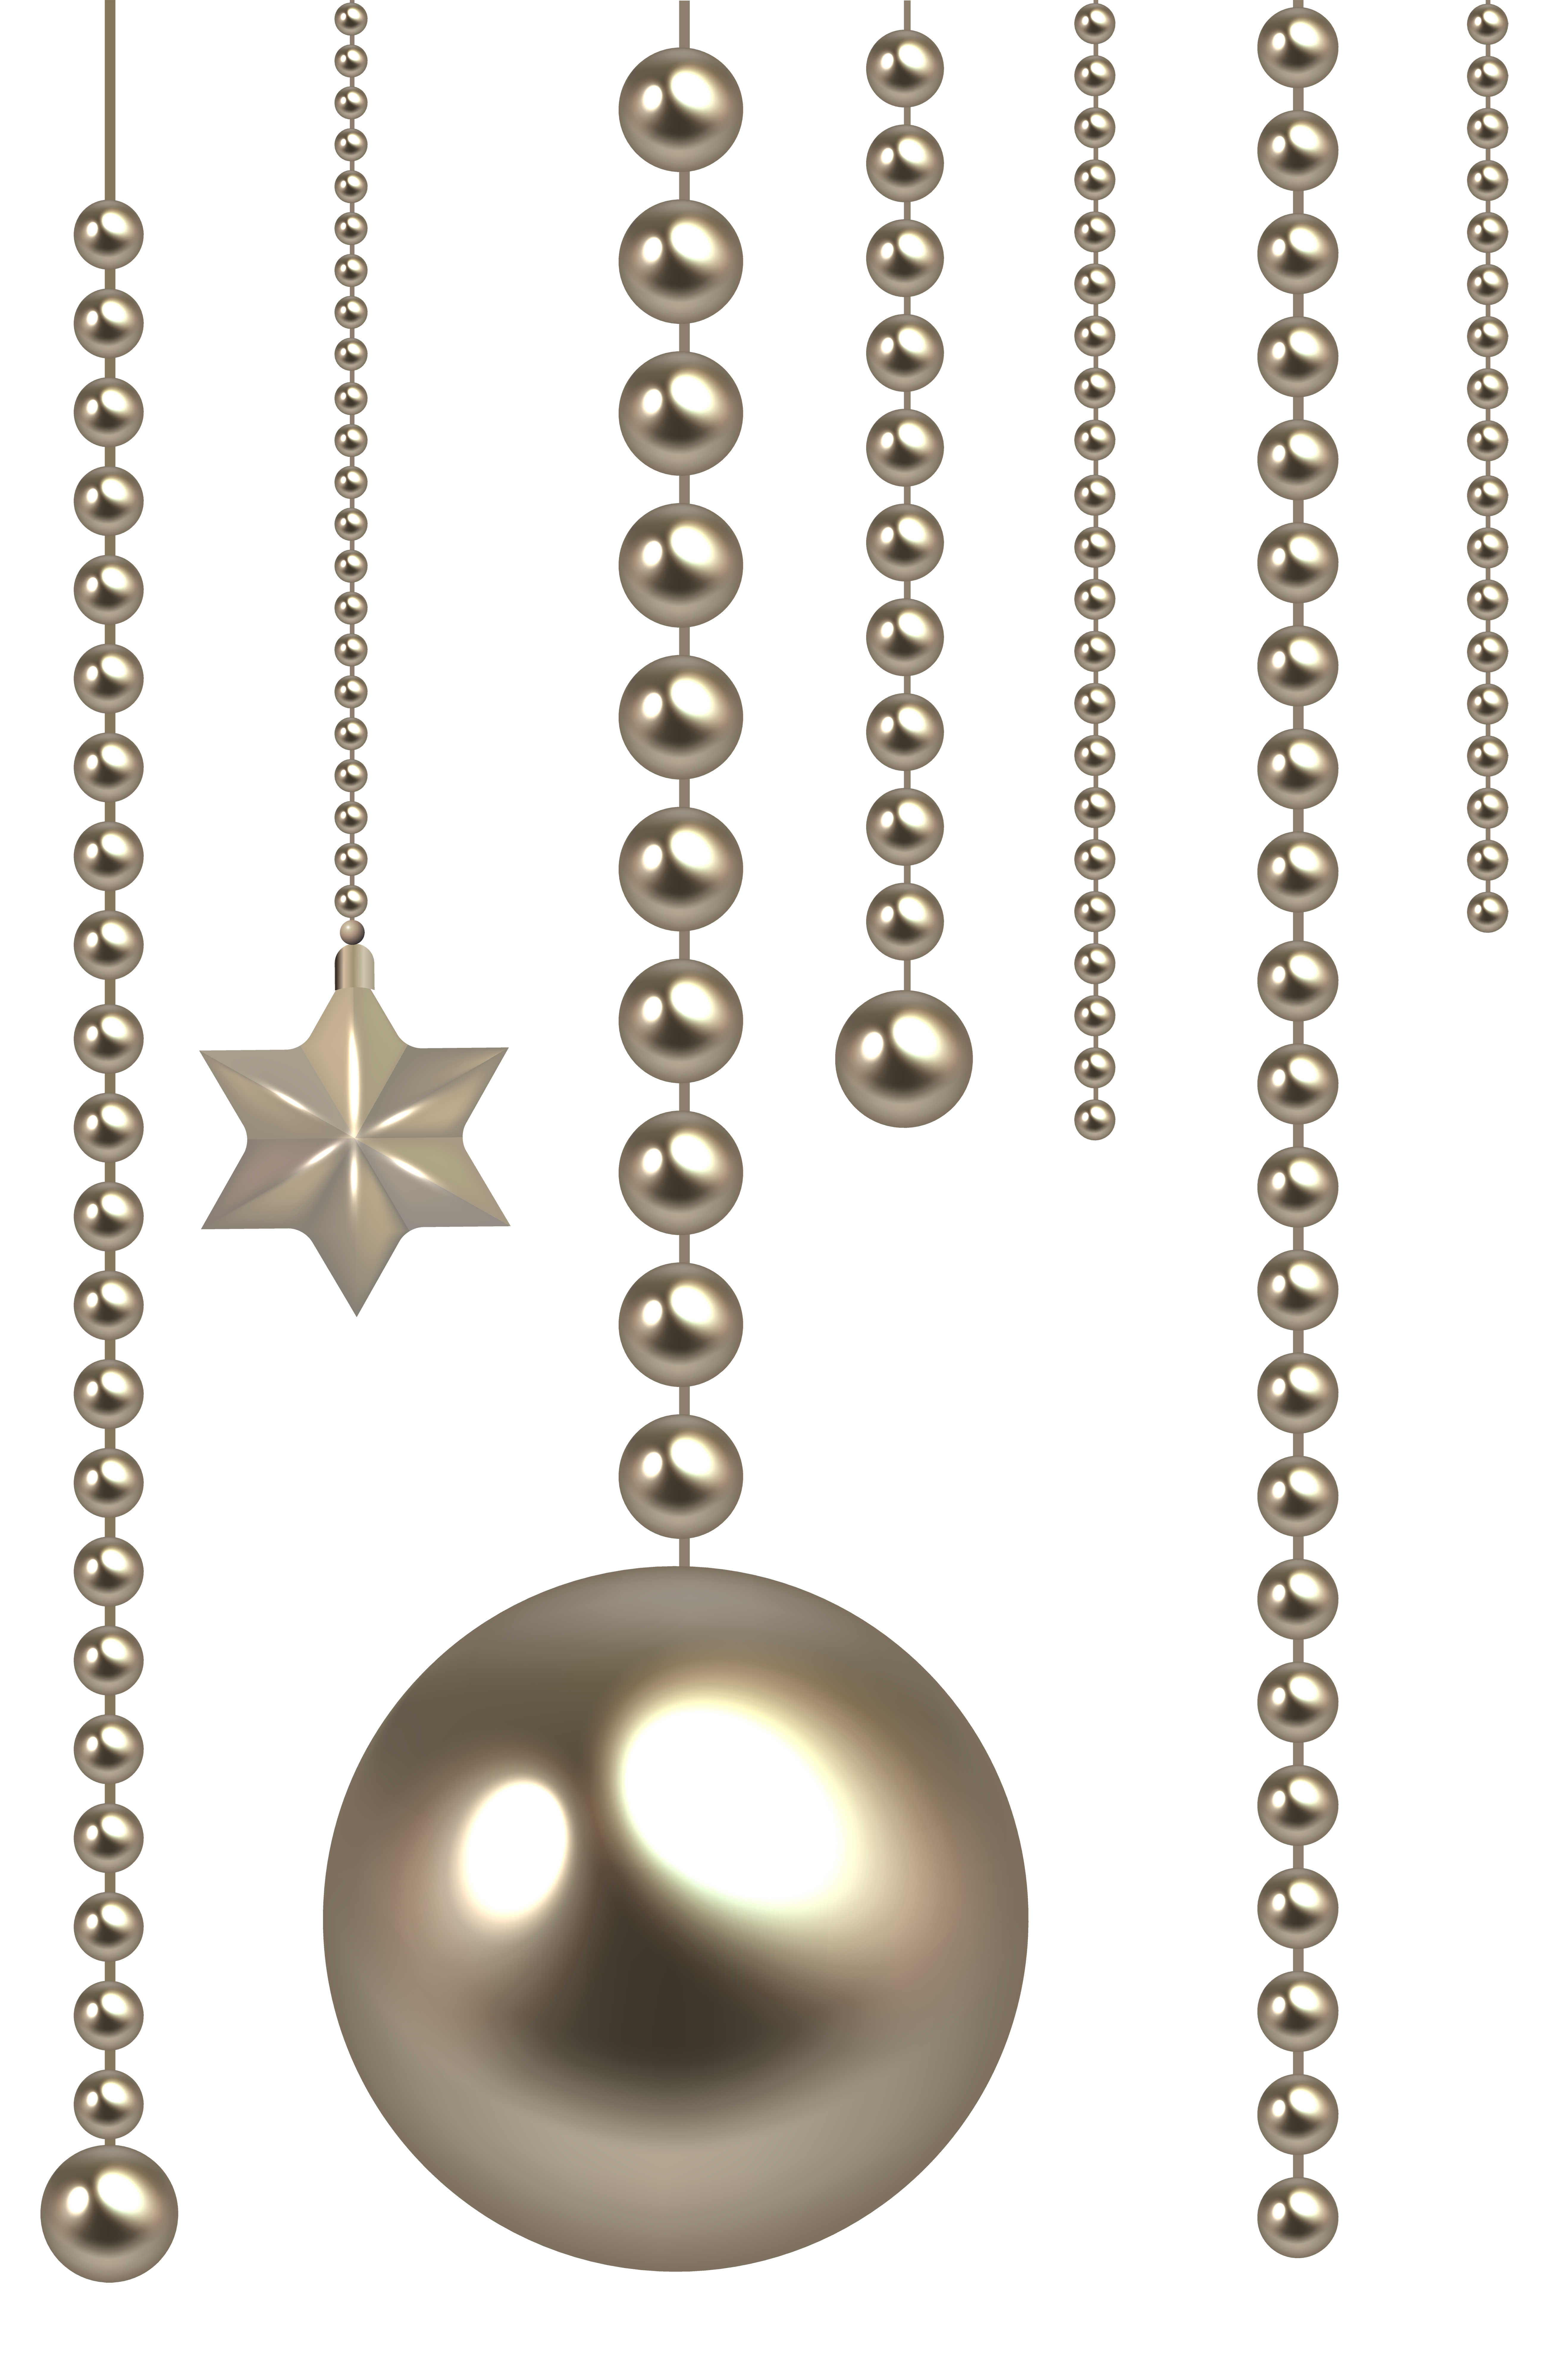 Ornaments clipart necklace. Bead scalable vector graphics